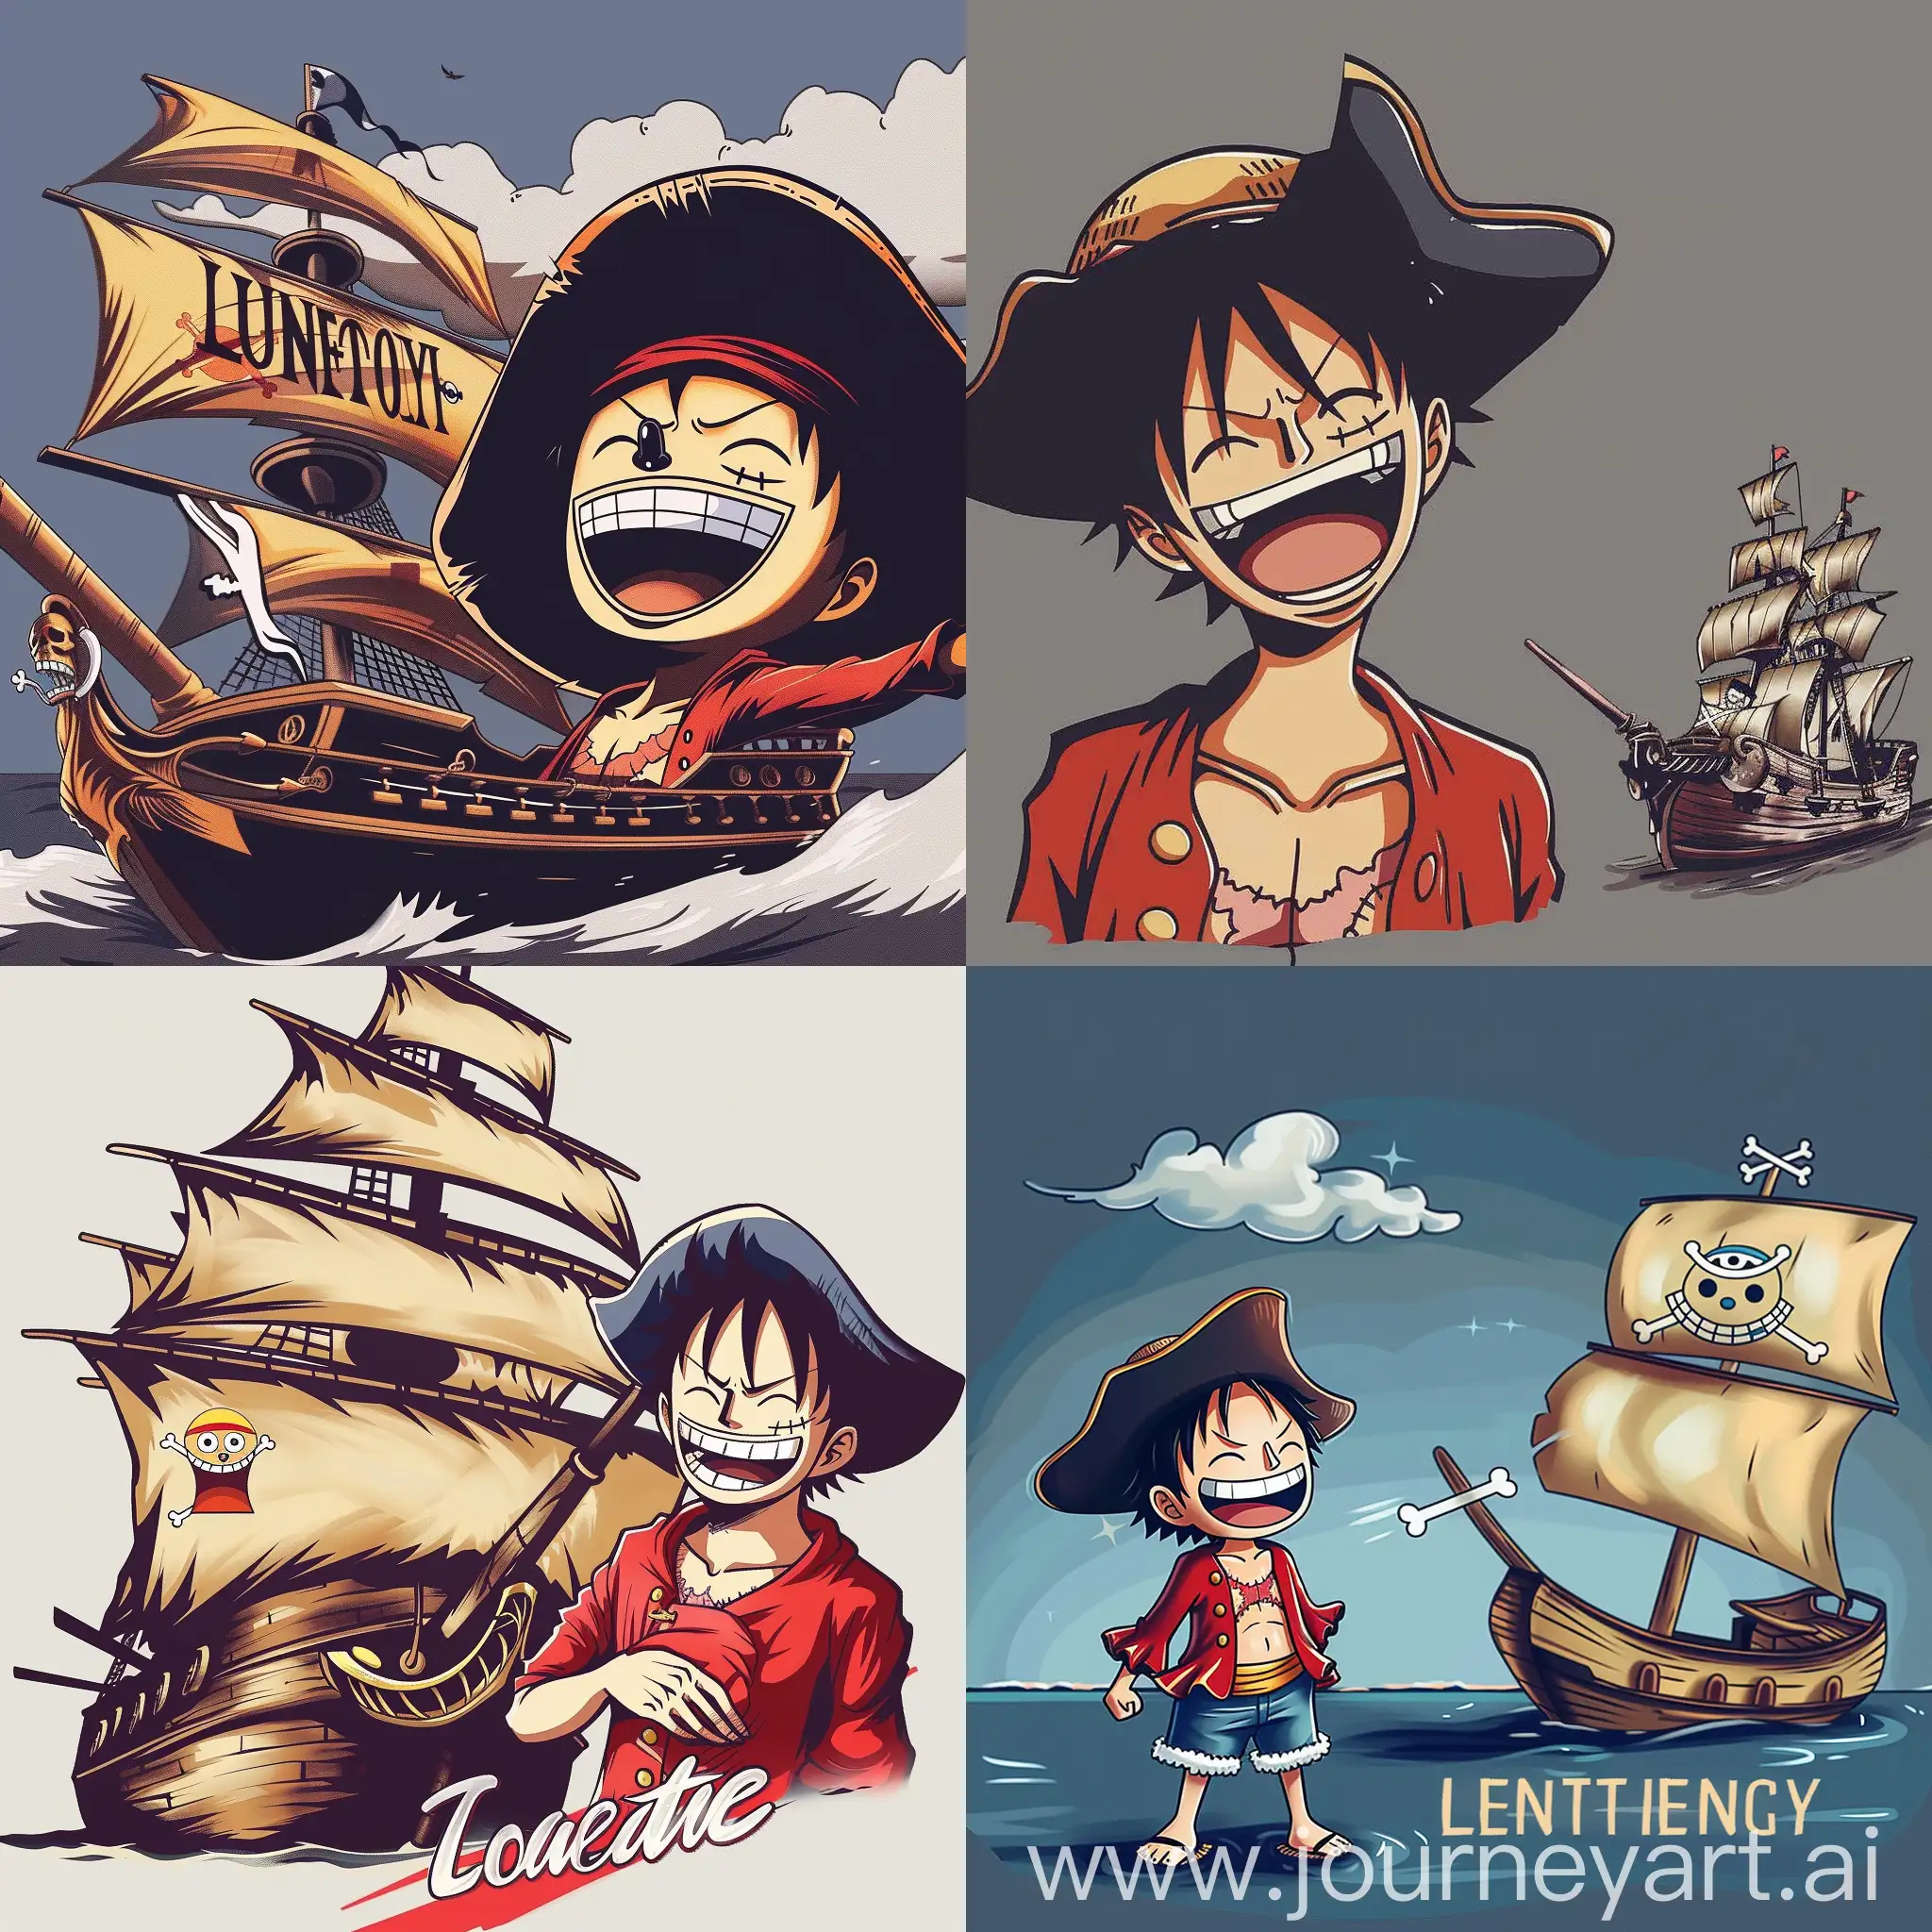 i want a pirate ship and luffy laughing at that ship using haki   for logo with name as luffy legacy